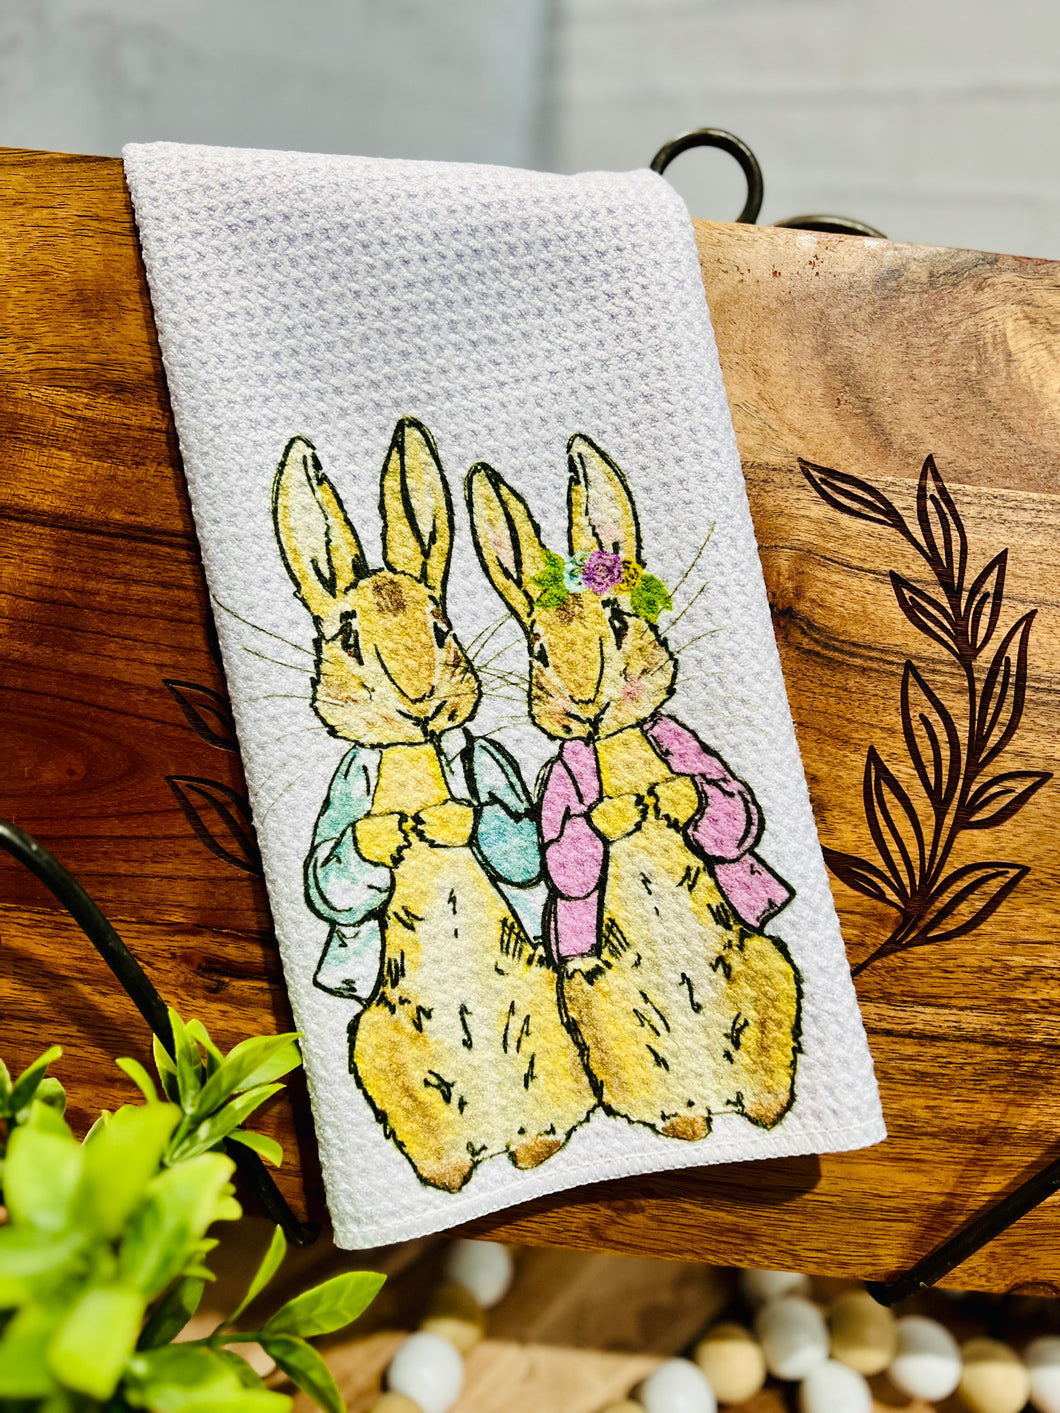 Easter Waffle Towels